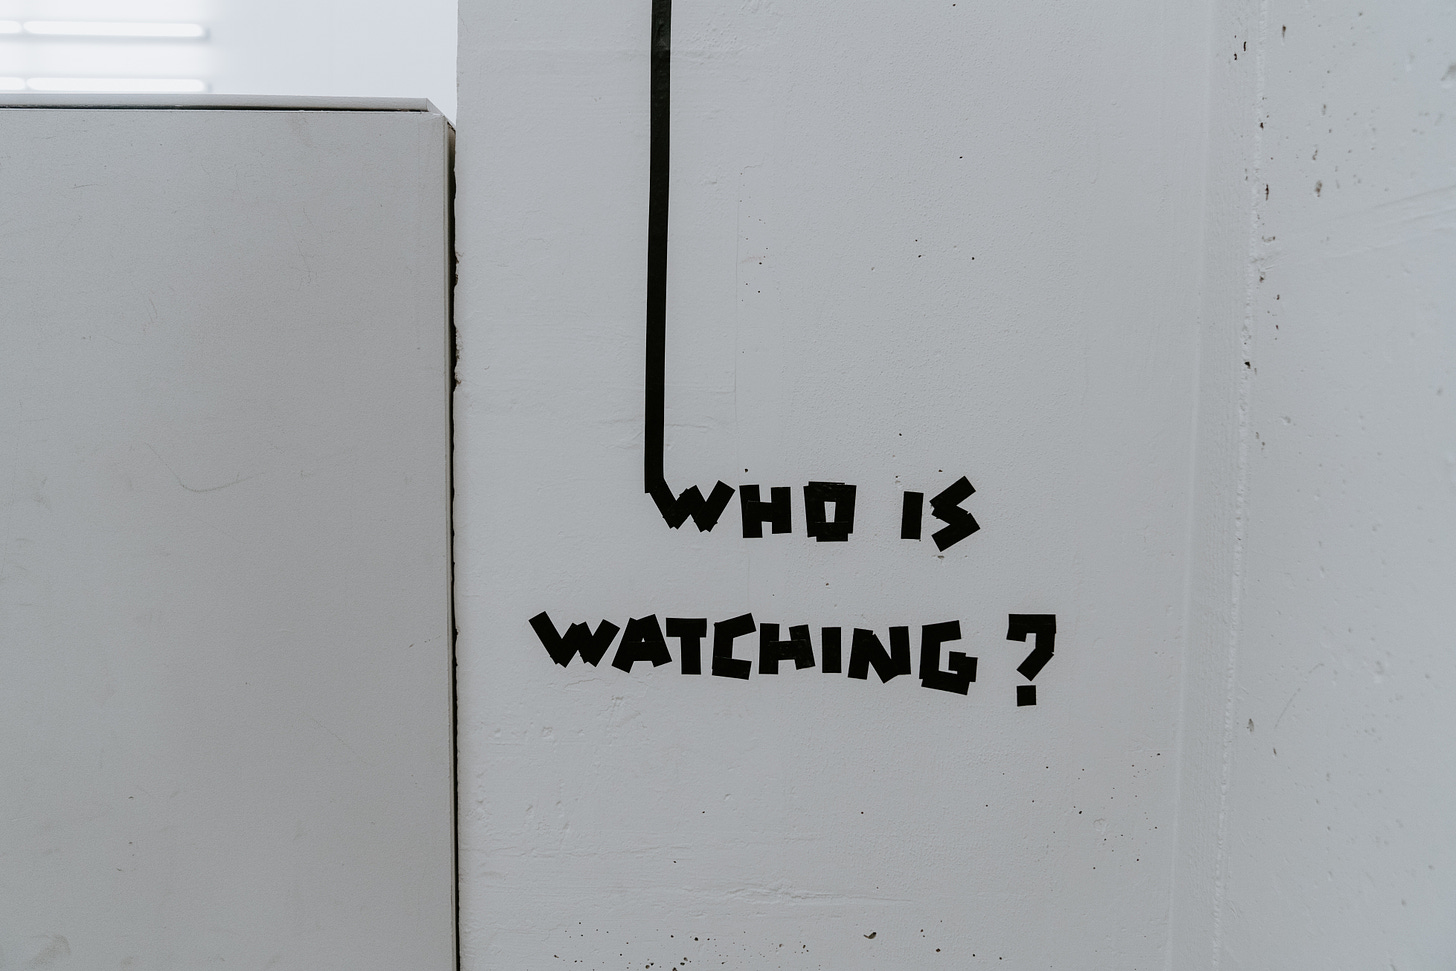 A picture of Who is Watching? painted on a wall